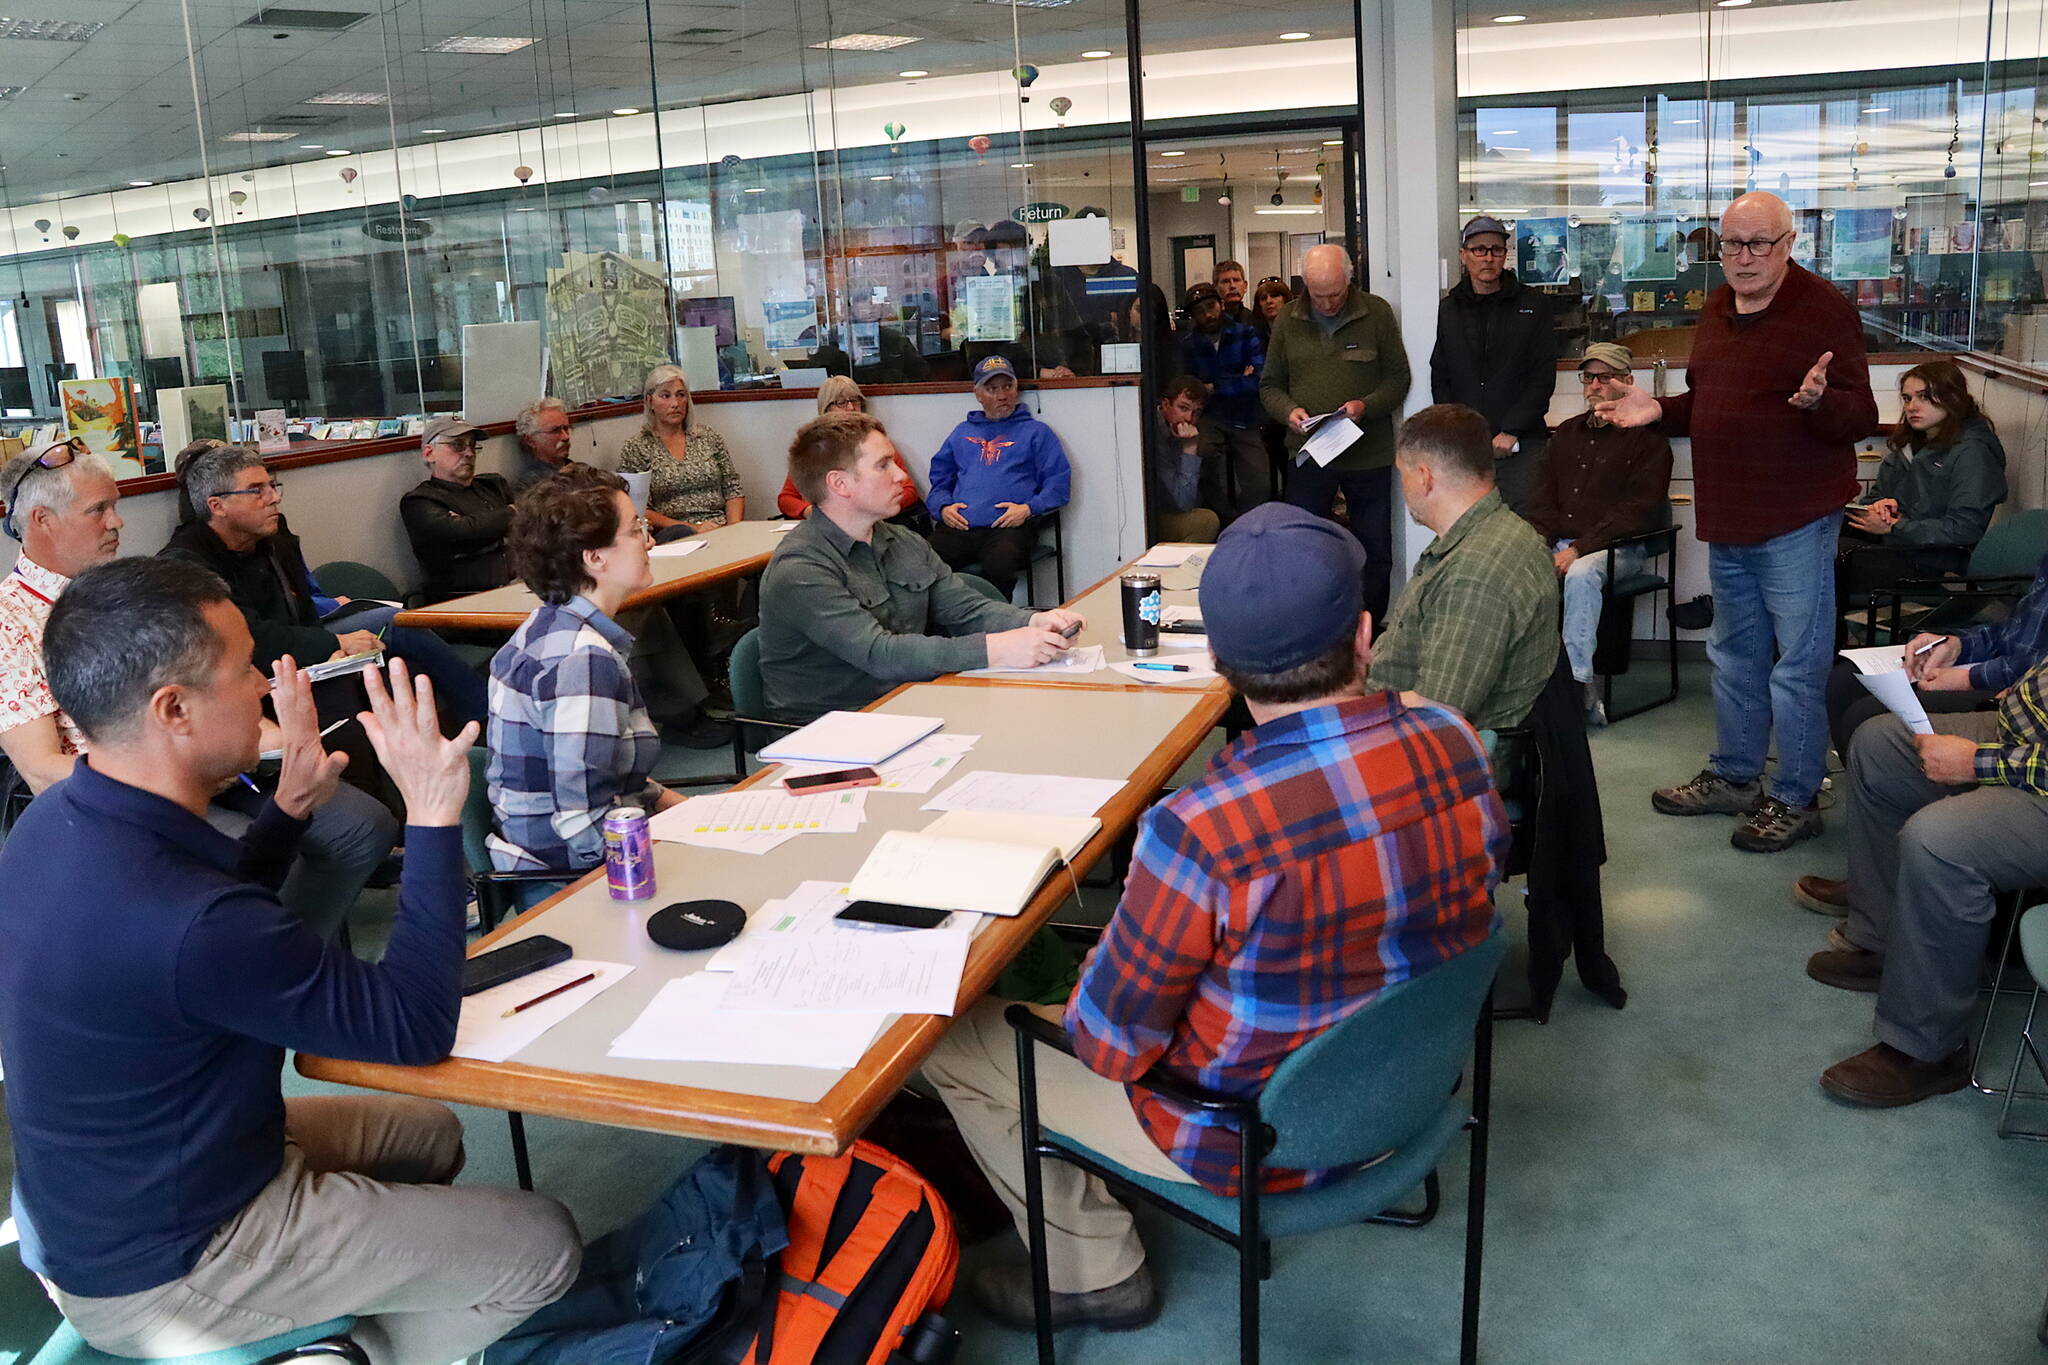 Juneau residents, including many current and former employees and leaders at Eaglecrest Ski Area, pack a room at the downtown public library for a meeting of the resort’s board of directors Thursday night. (Mark Sabbatini / Juneau Empire)